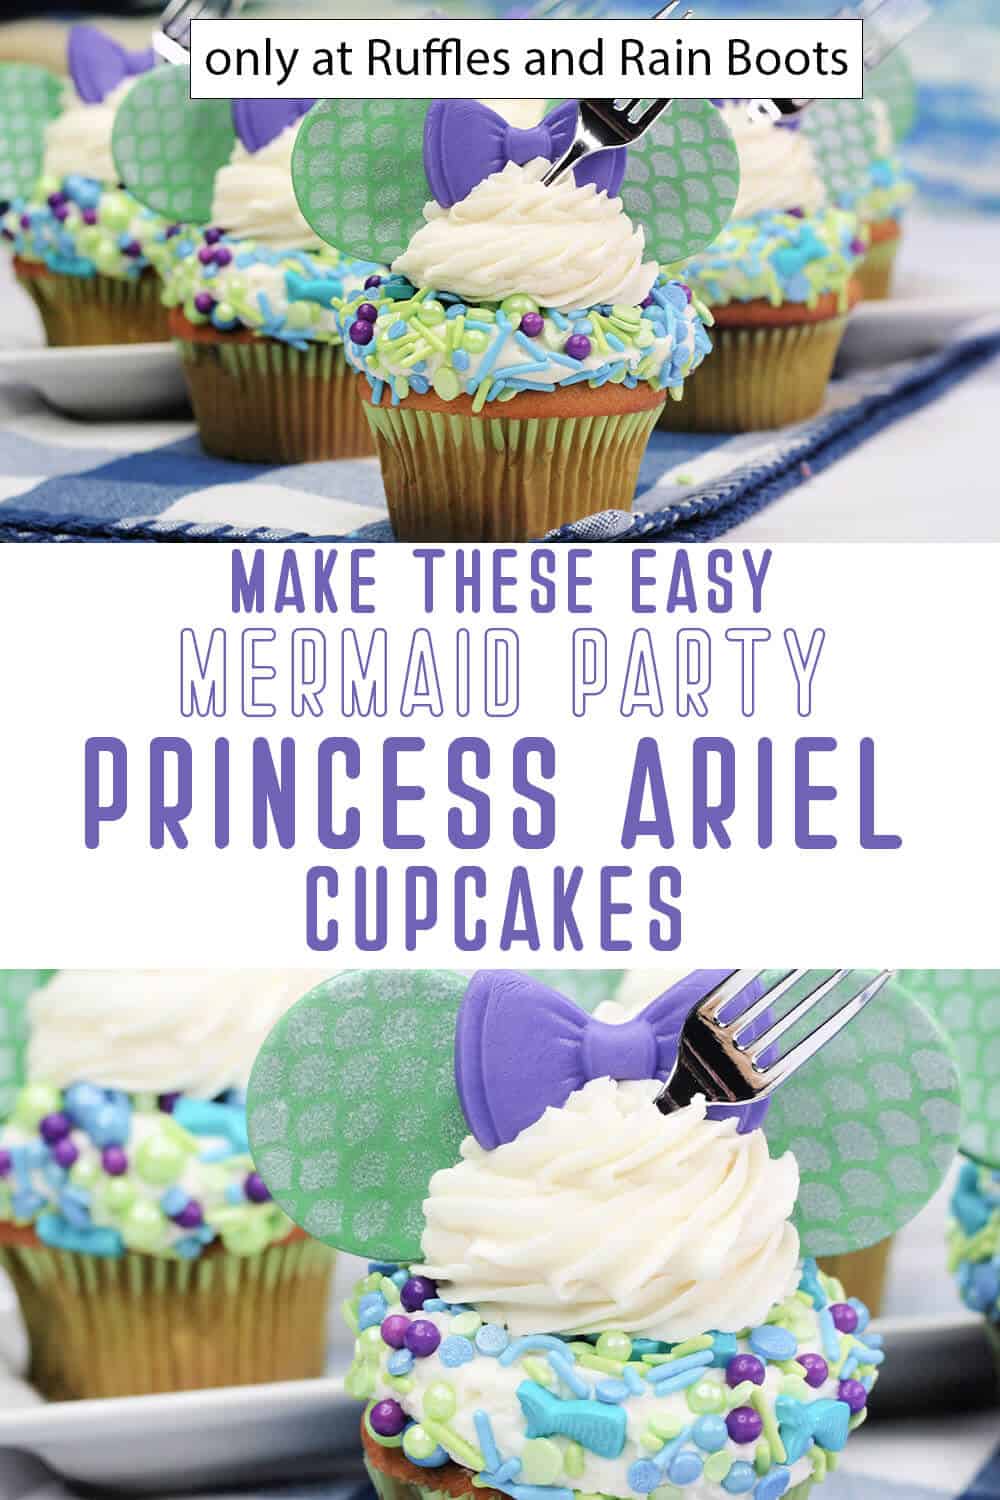 photo collage of disney princess ariel cupcakes with text which reads make these easy mermaid party princess ariel cupcakes